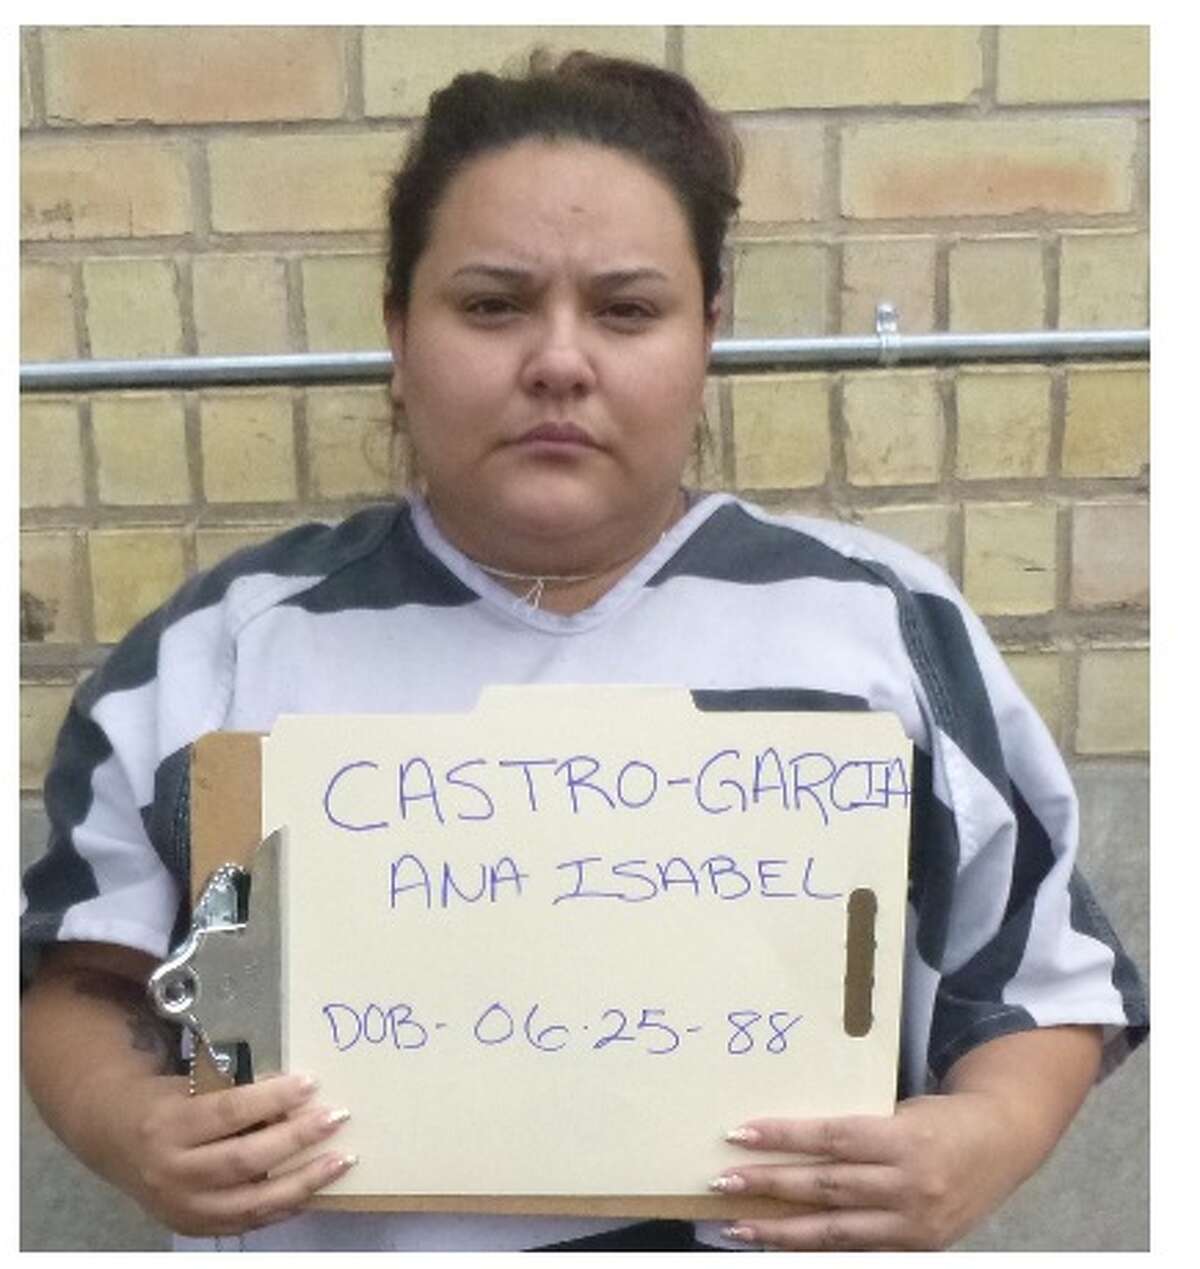 Ana Isabel Castro-Garcia, 31 was arrested after she agreed to and met with an undercover officer who posed as a customer needing a nail service.